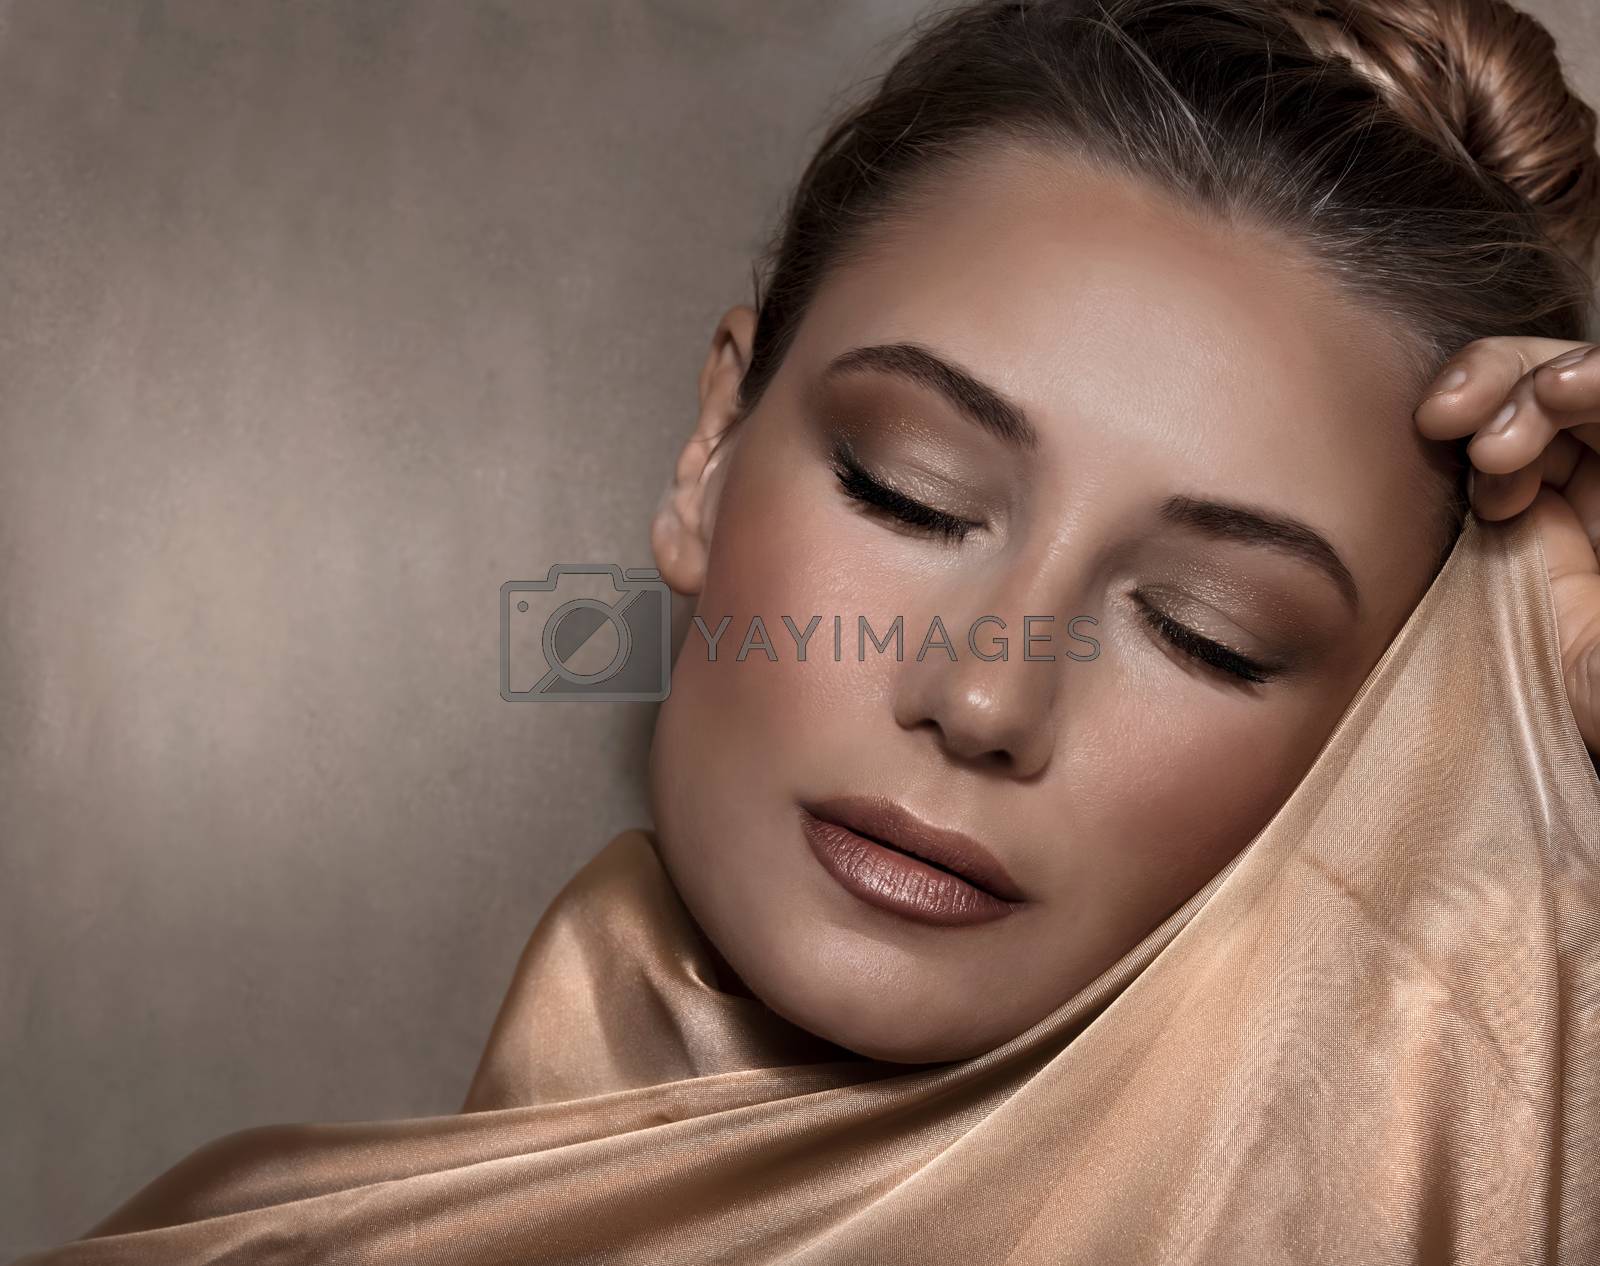 Closeup Portrait of a Beautiful Woman with Evening Makeup Wrapped in a Golden Silk Shawl over Beige Background. Luxury Fashion Look. 